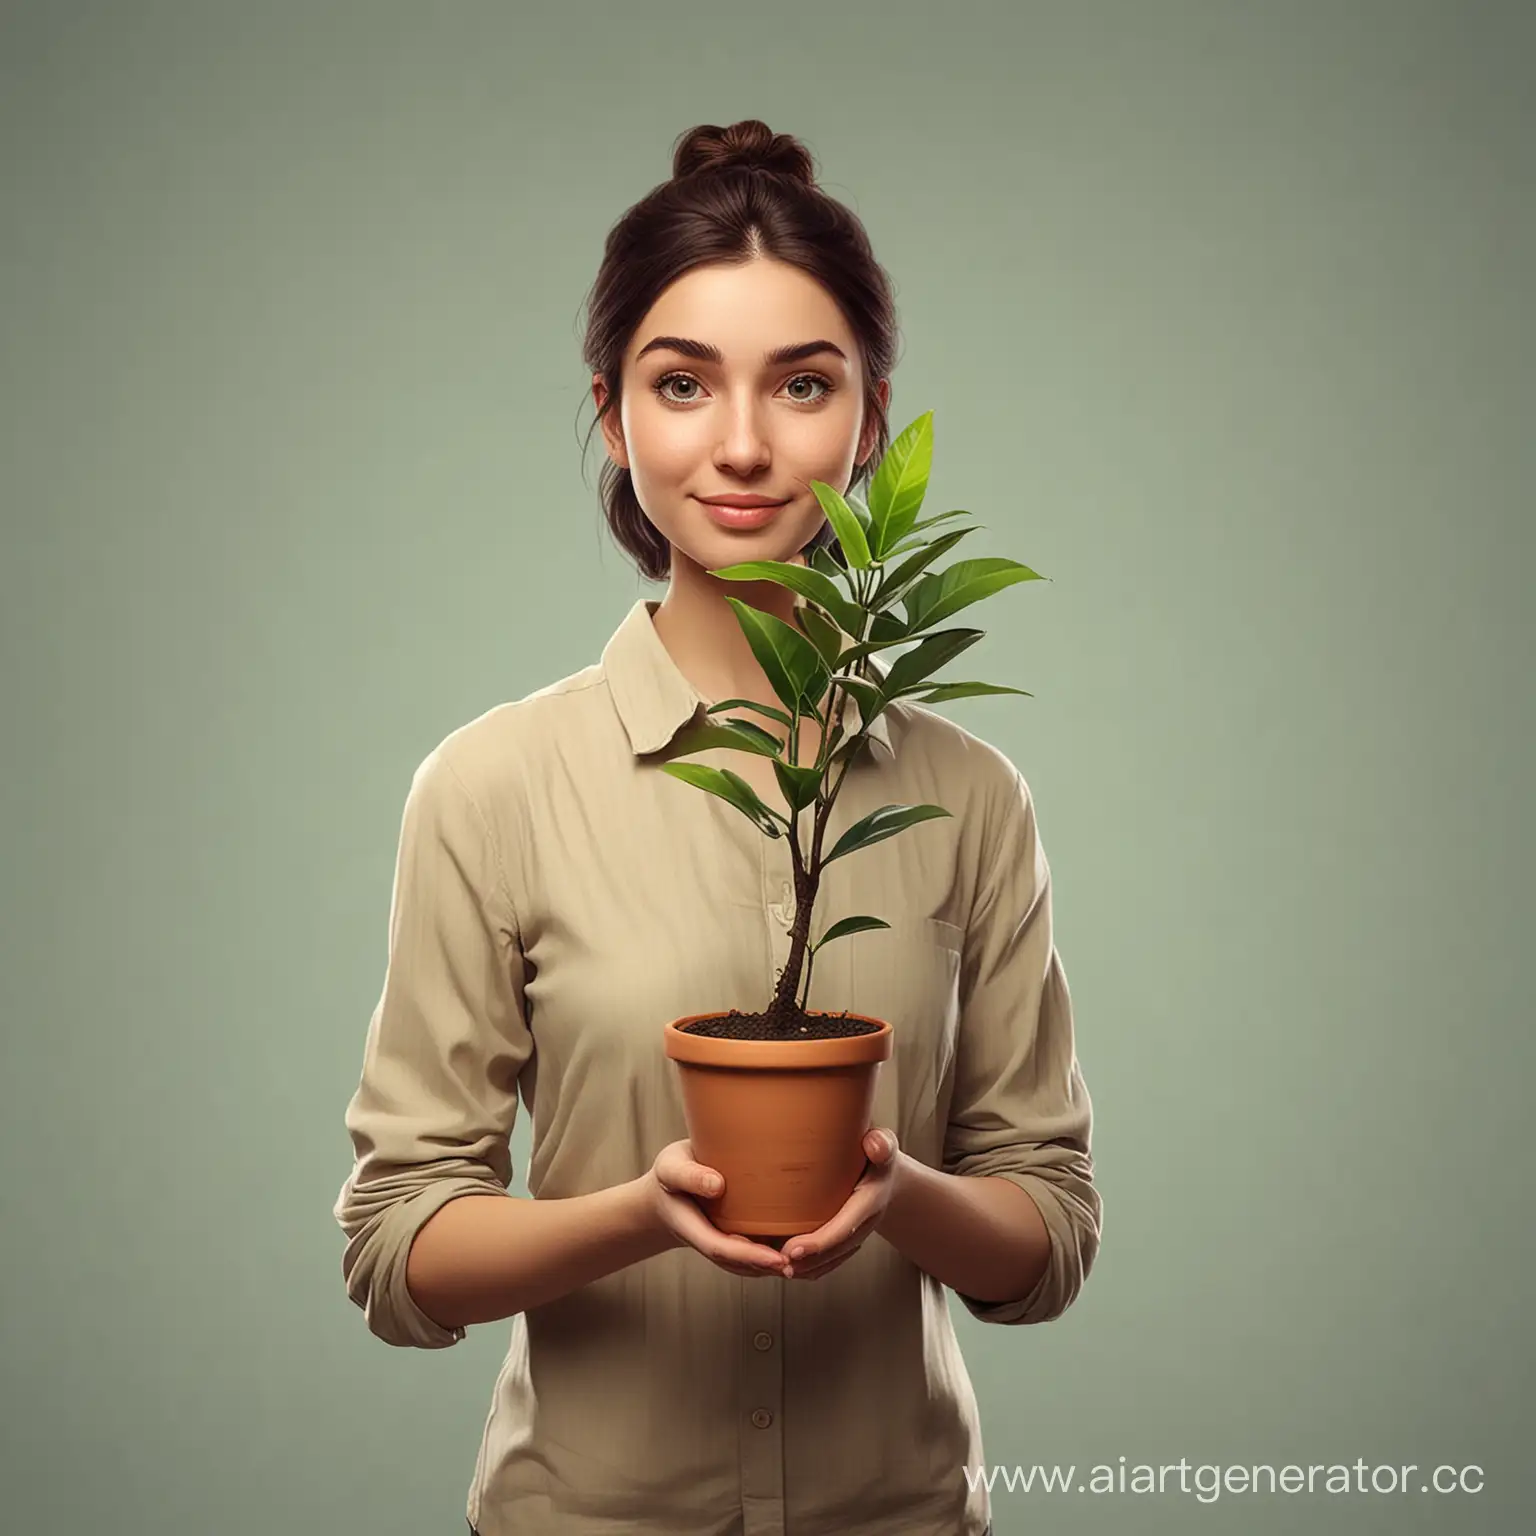 Animated-Scene-Person-Caring-for-Potted-Plant-on-Uniform-Background